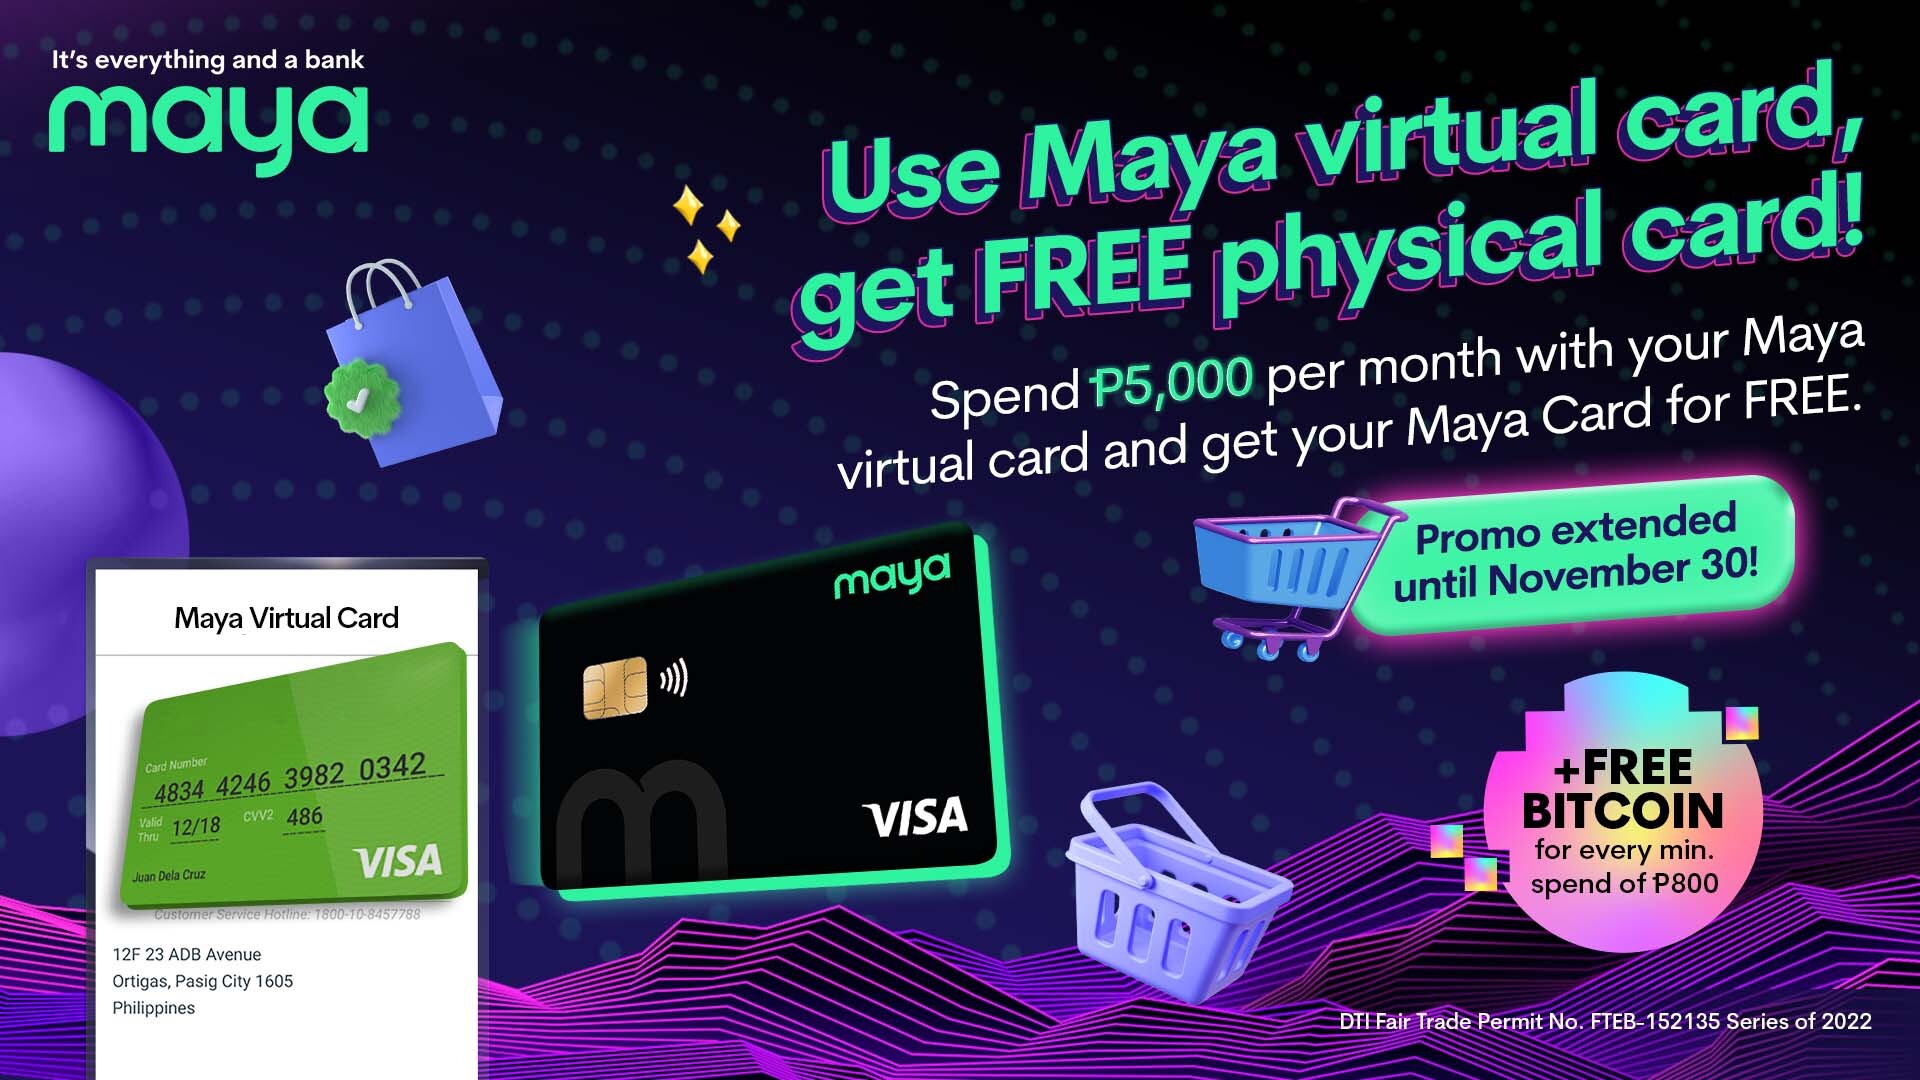 Use your virtual Maya card and get a FREE physical card!